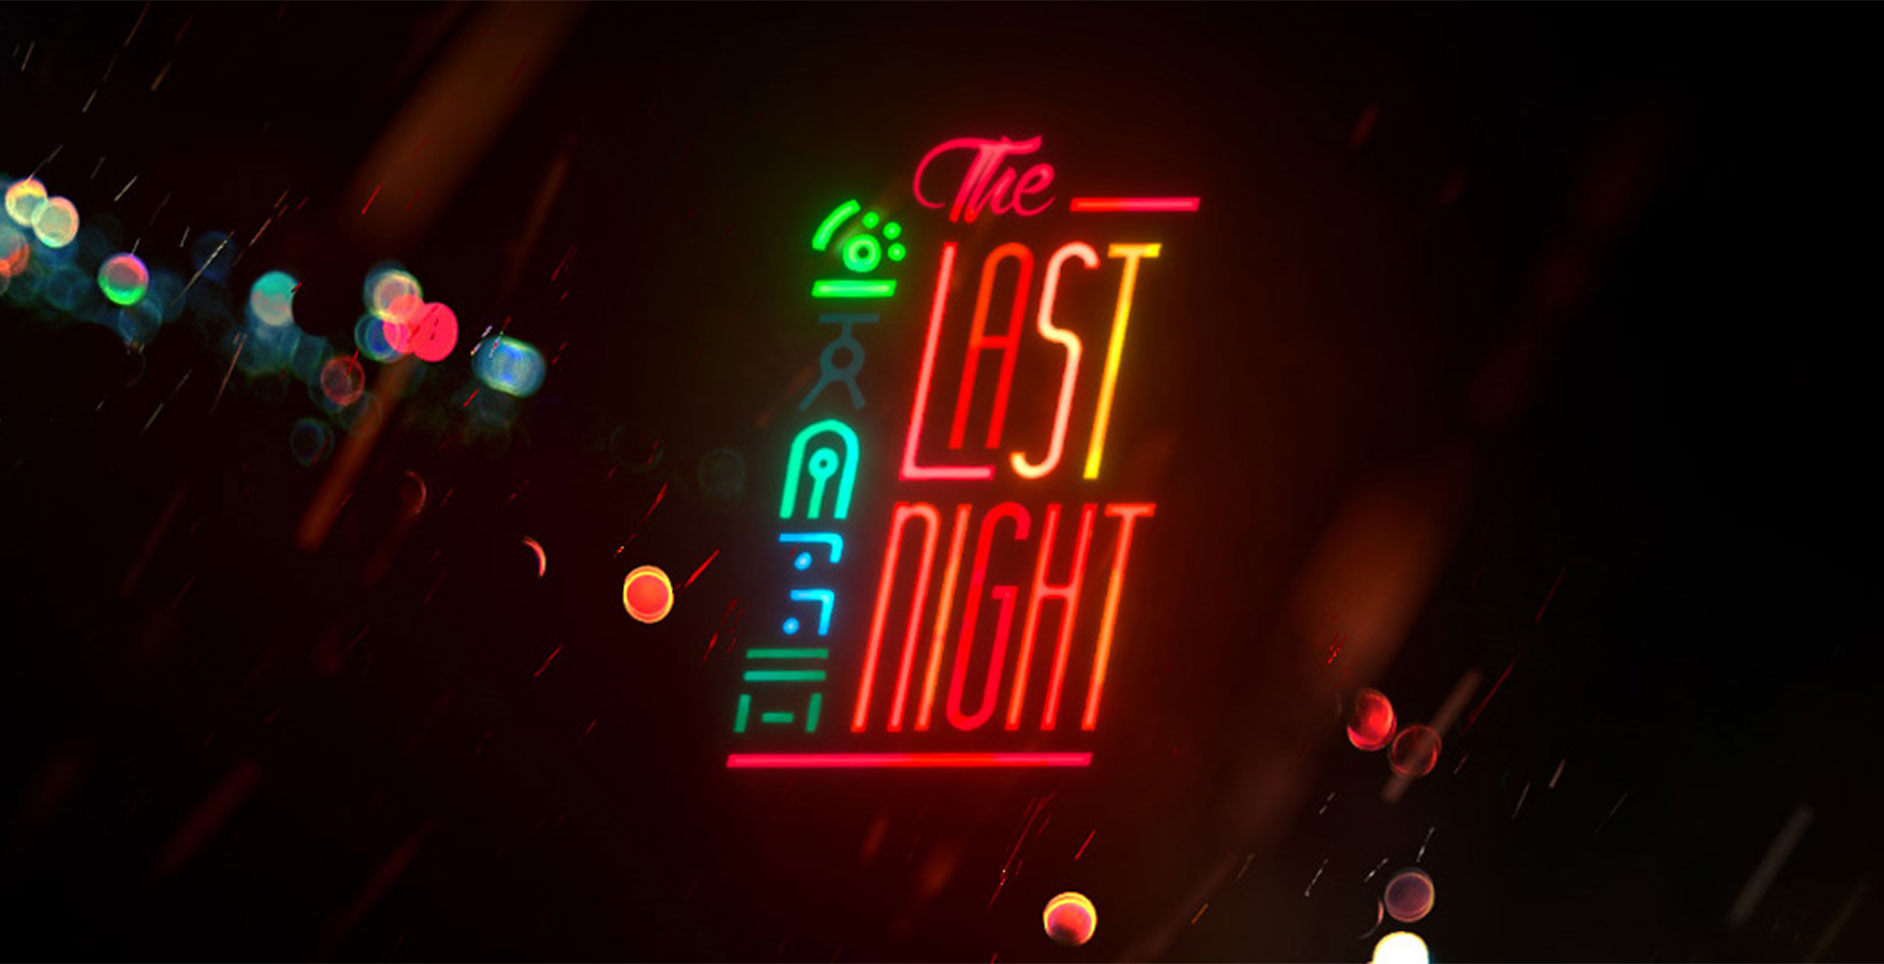 Last night horror. The last Night (2021). The last Night игра. The last Night игра обложка. Зе ласт Найт.